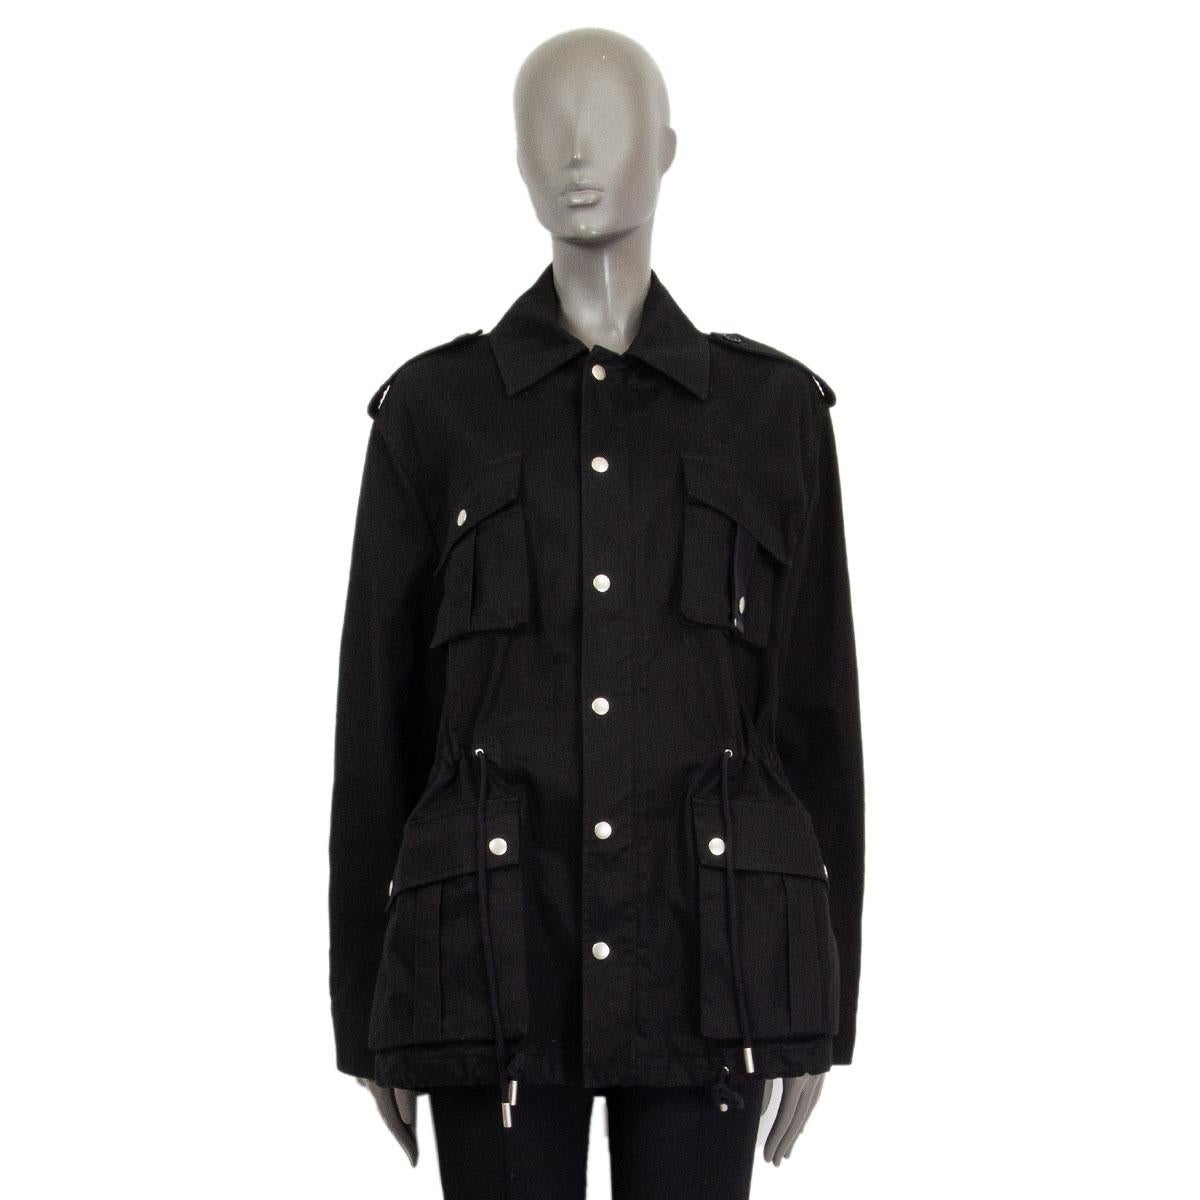 100% authentic Saint Laurent oversized cargo jacket in black cotton (77%) and ramie (23%). Opens with a zipper at front and has four patch pockets and a drawstring at waist. Features silver-tone hardware. Has been worn and is in excellent condition.